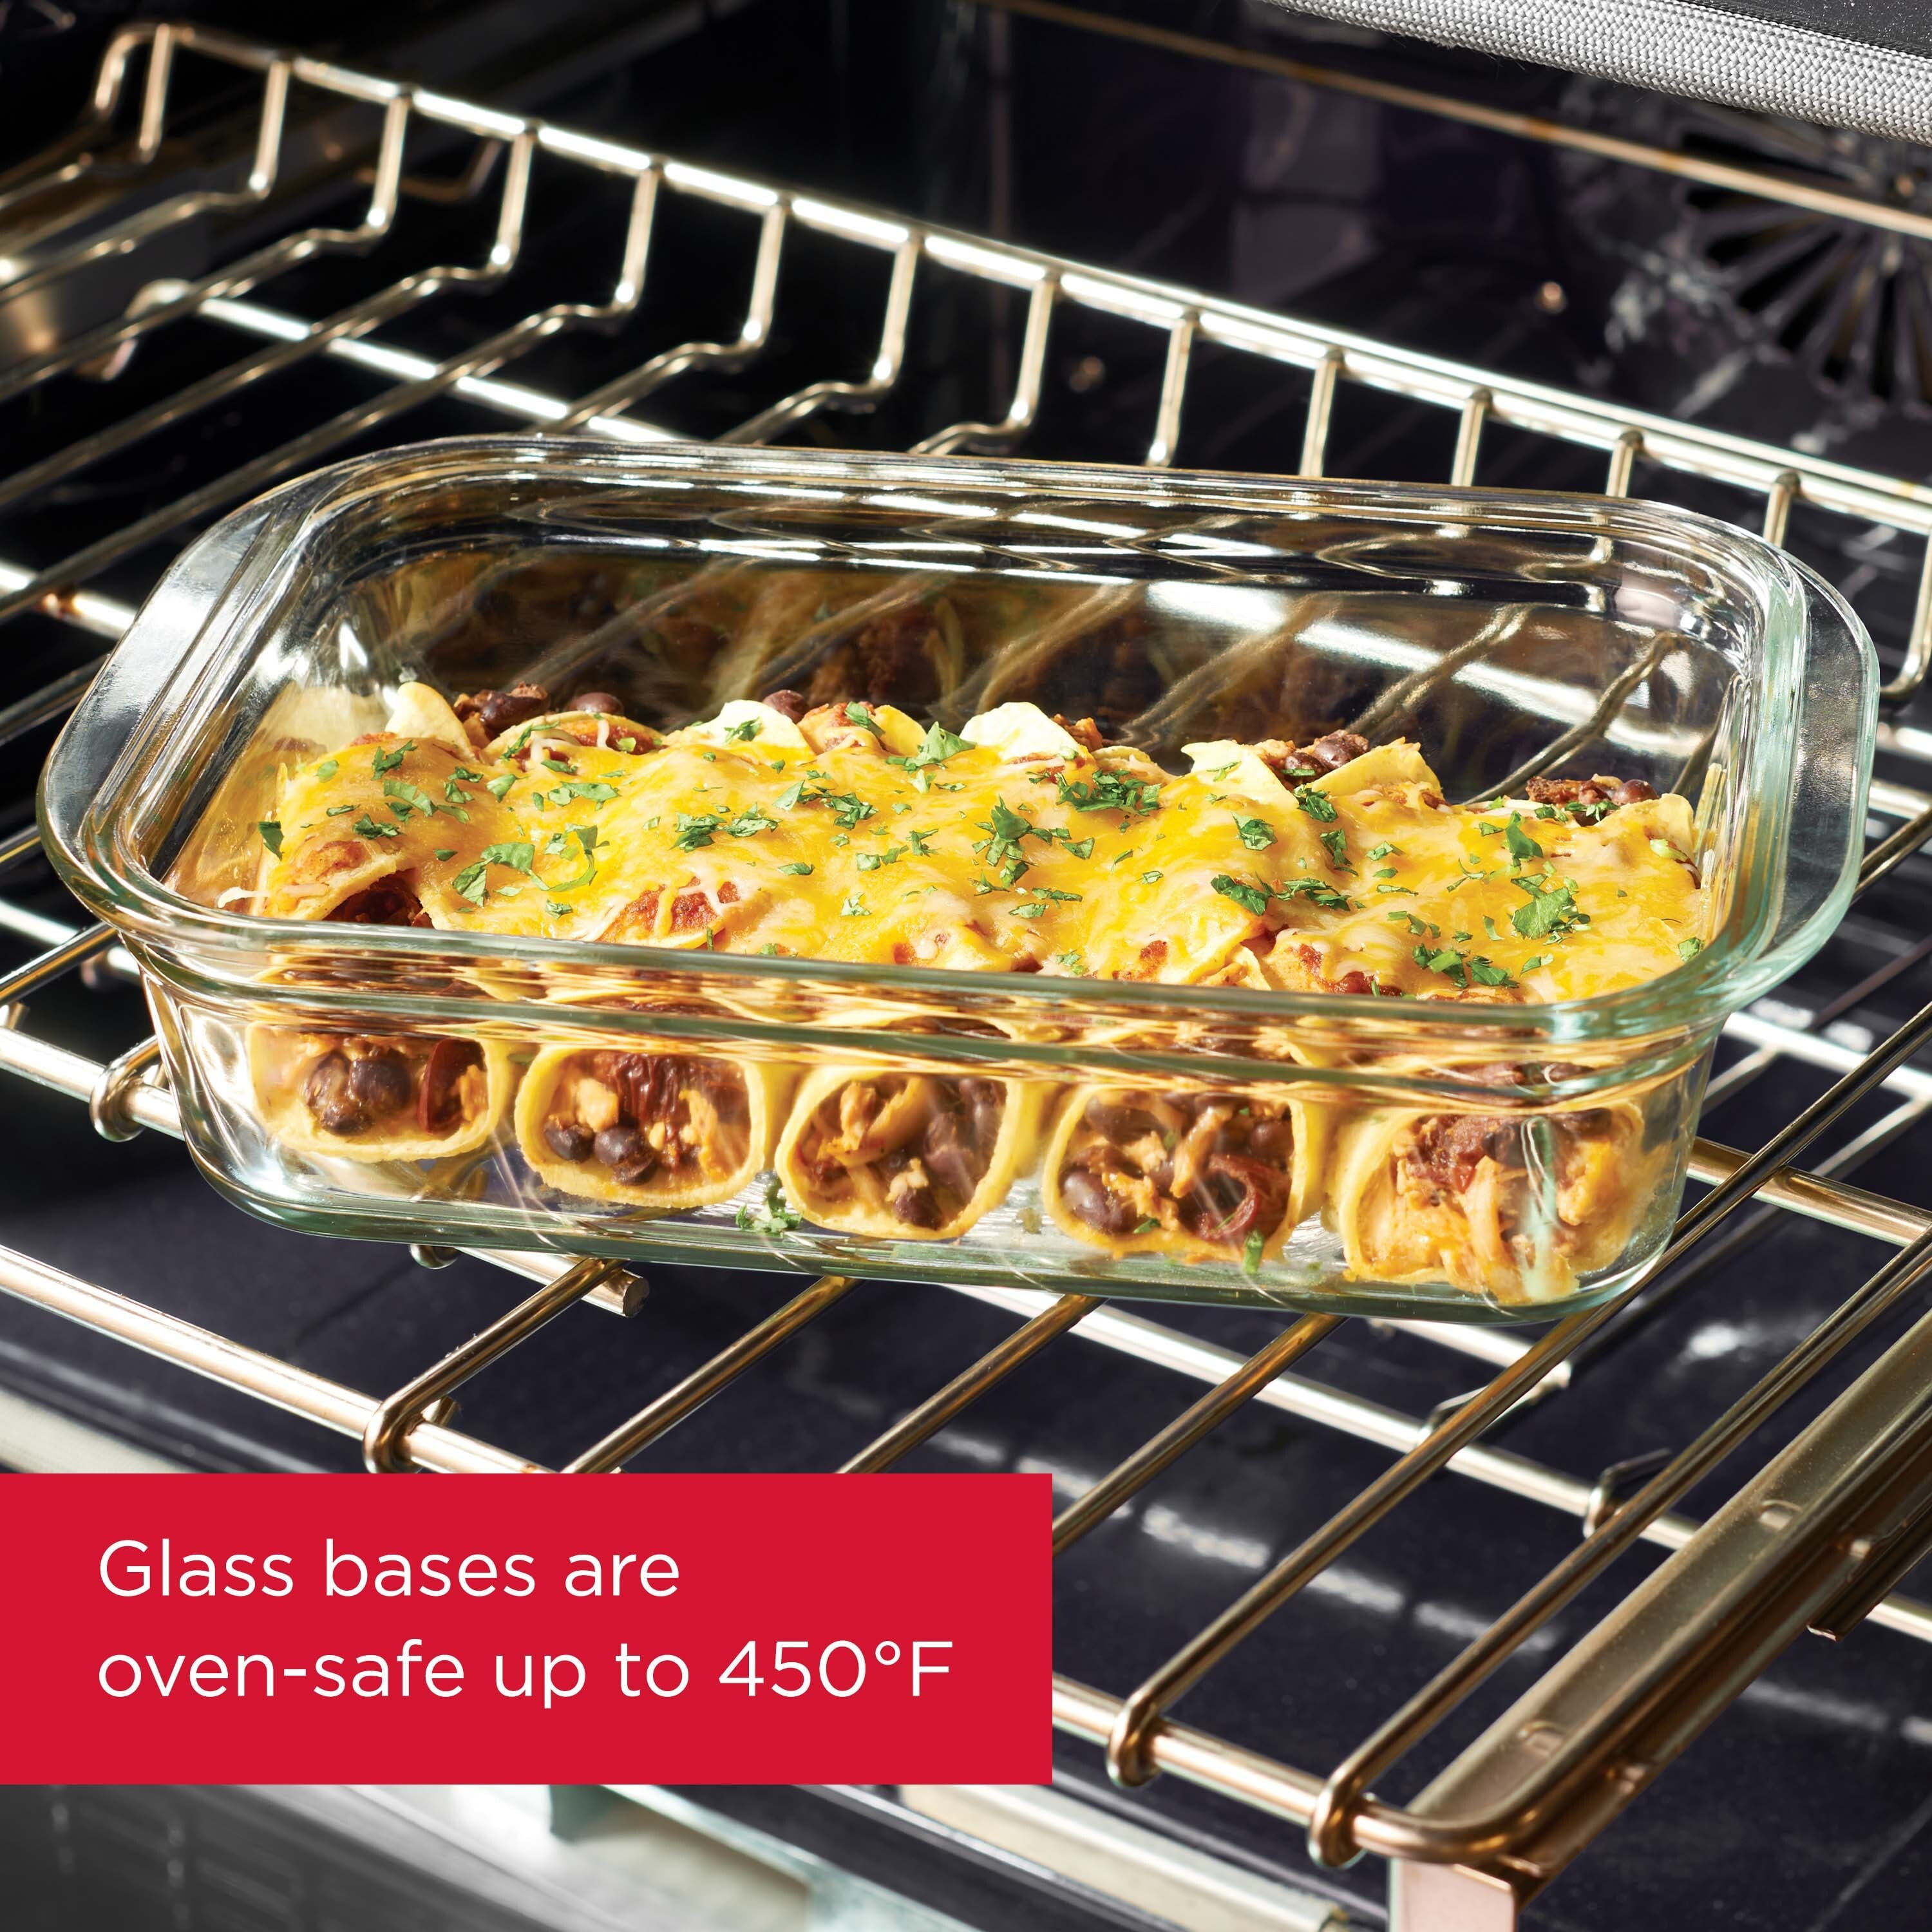 Rubbermaid 2118315 Brilliance Glass Storage 8-Cup Food Containers with  Lids, 2-Pack (4 Pieces Total), BPA Free and Leak Proof, Large, Clear